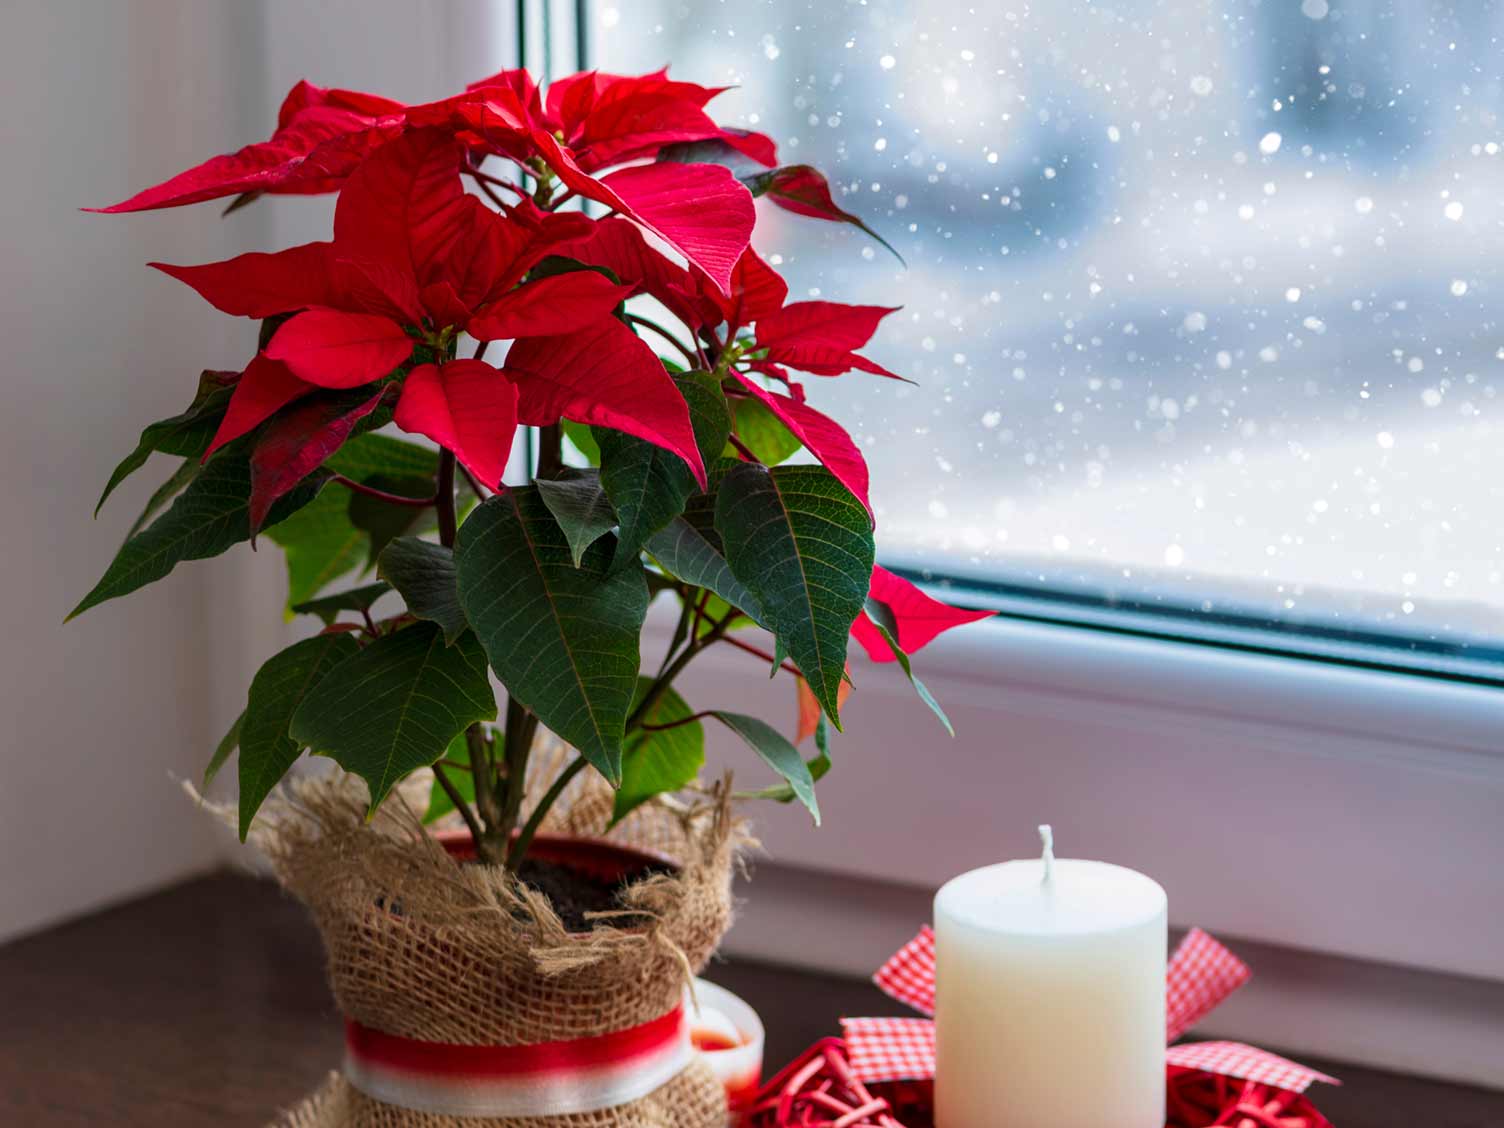 Poinsettia are popular at Christmastime